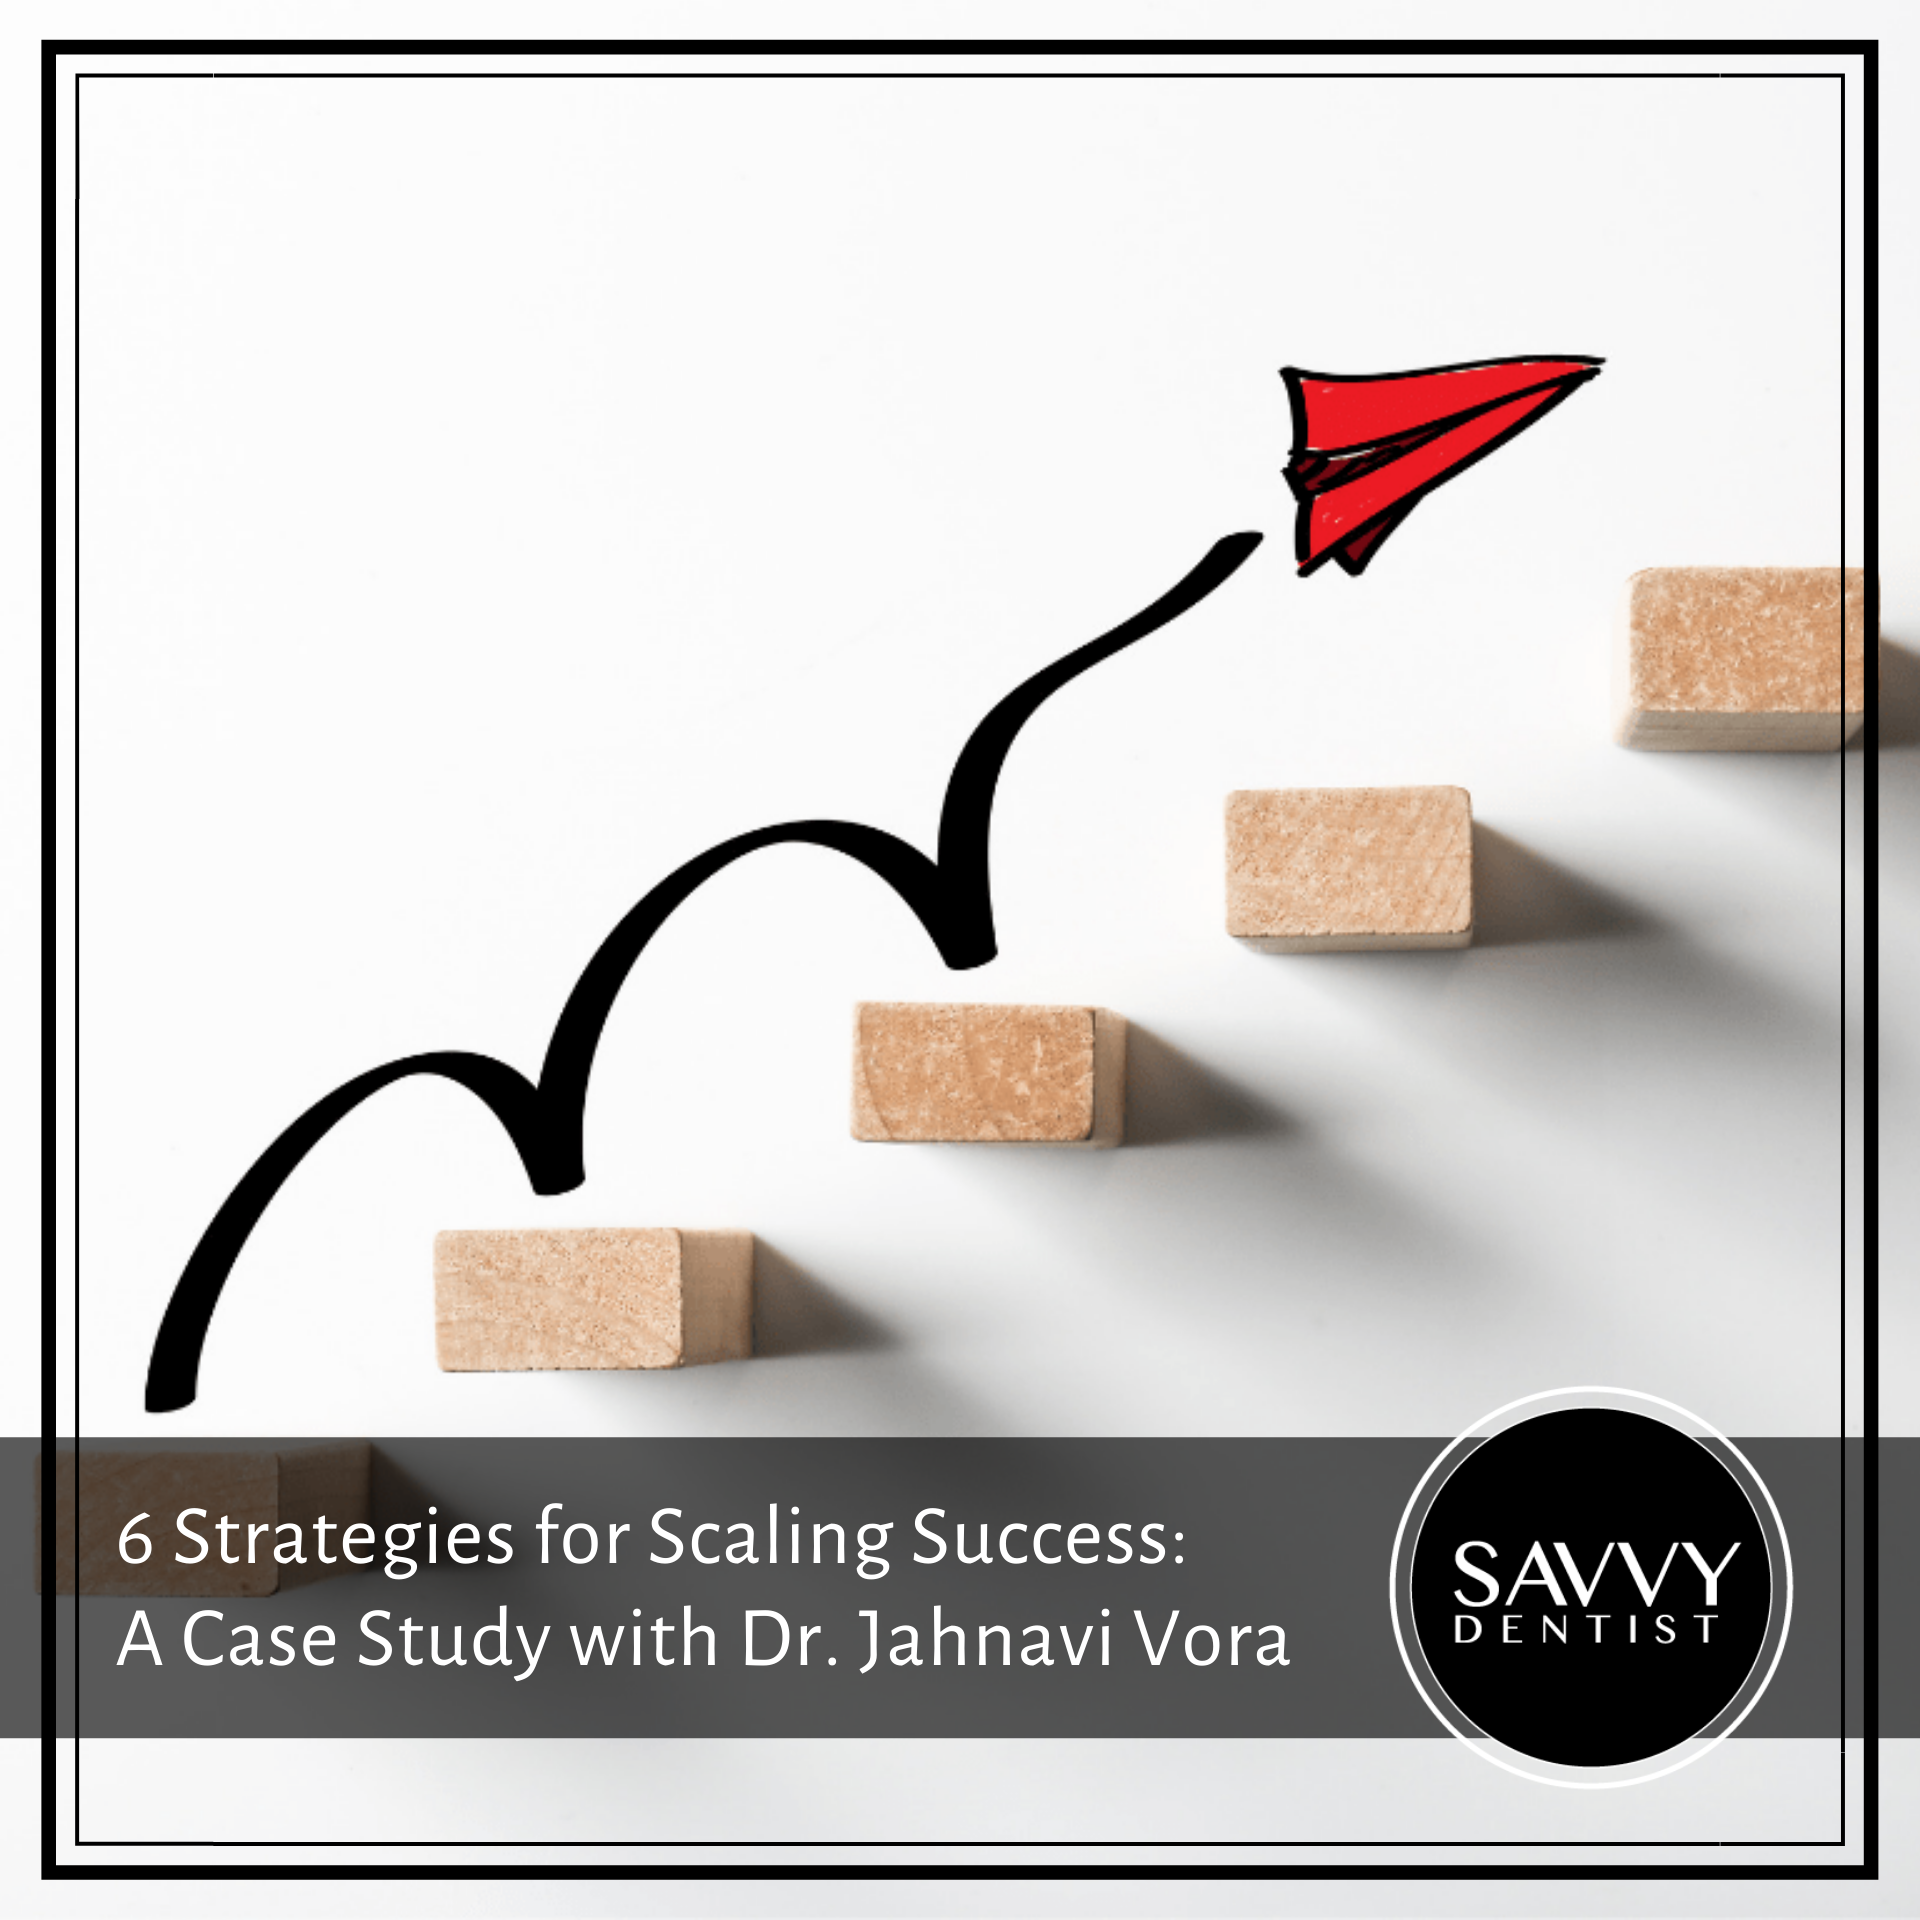 6 Strategies for Scaling Success: A Case Study with Dr Jahnavi Vora